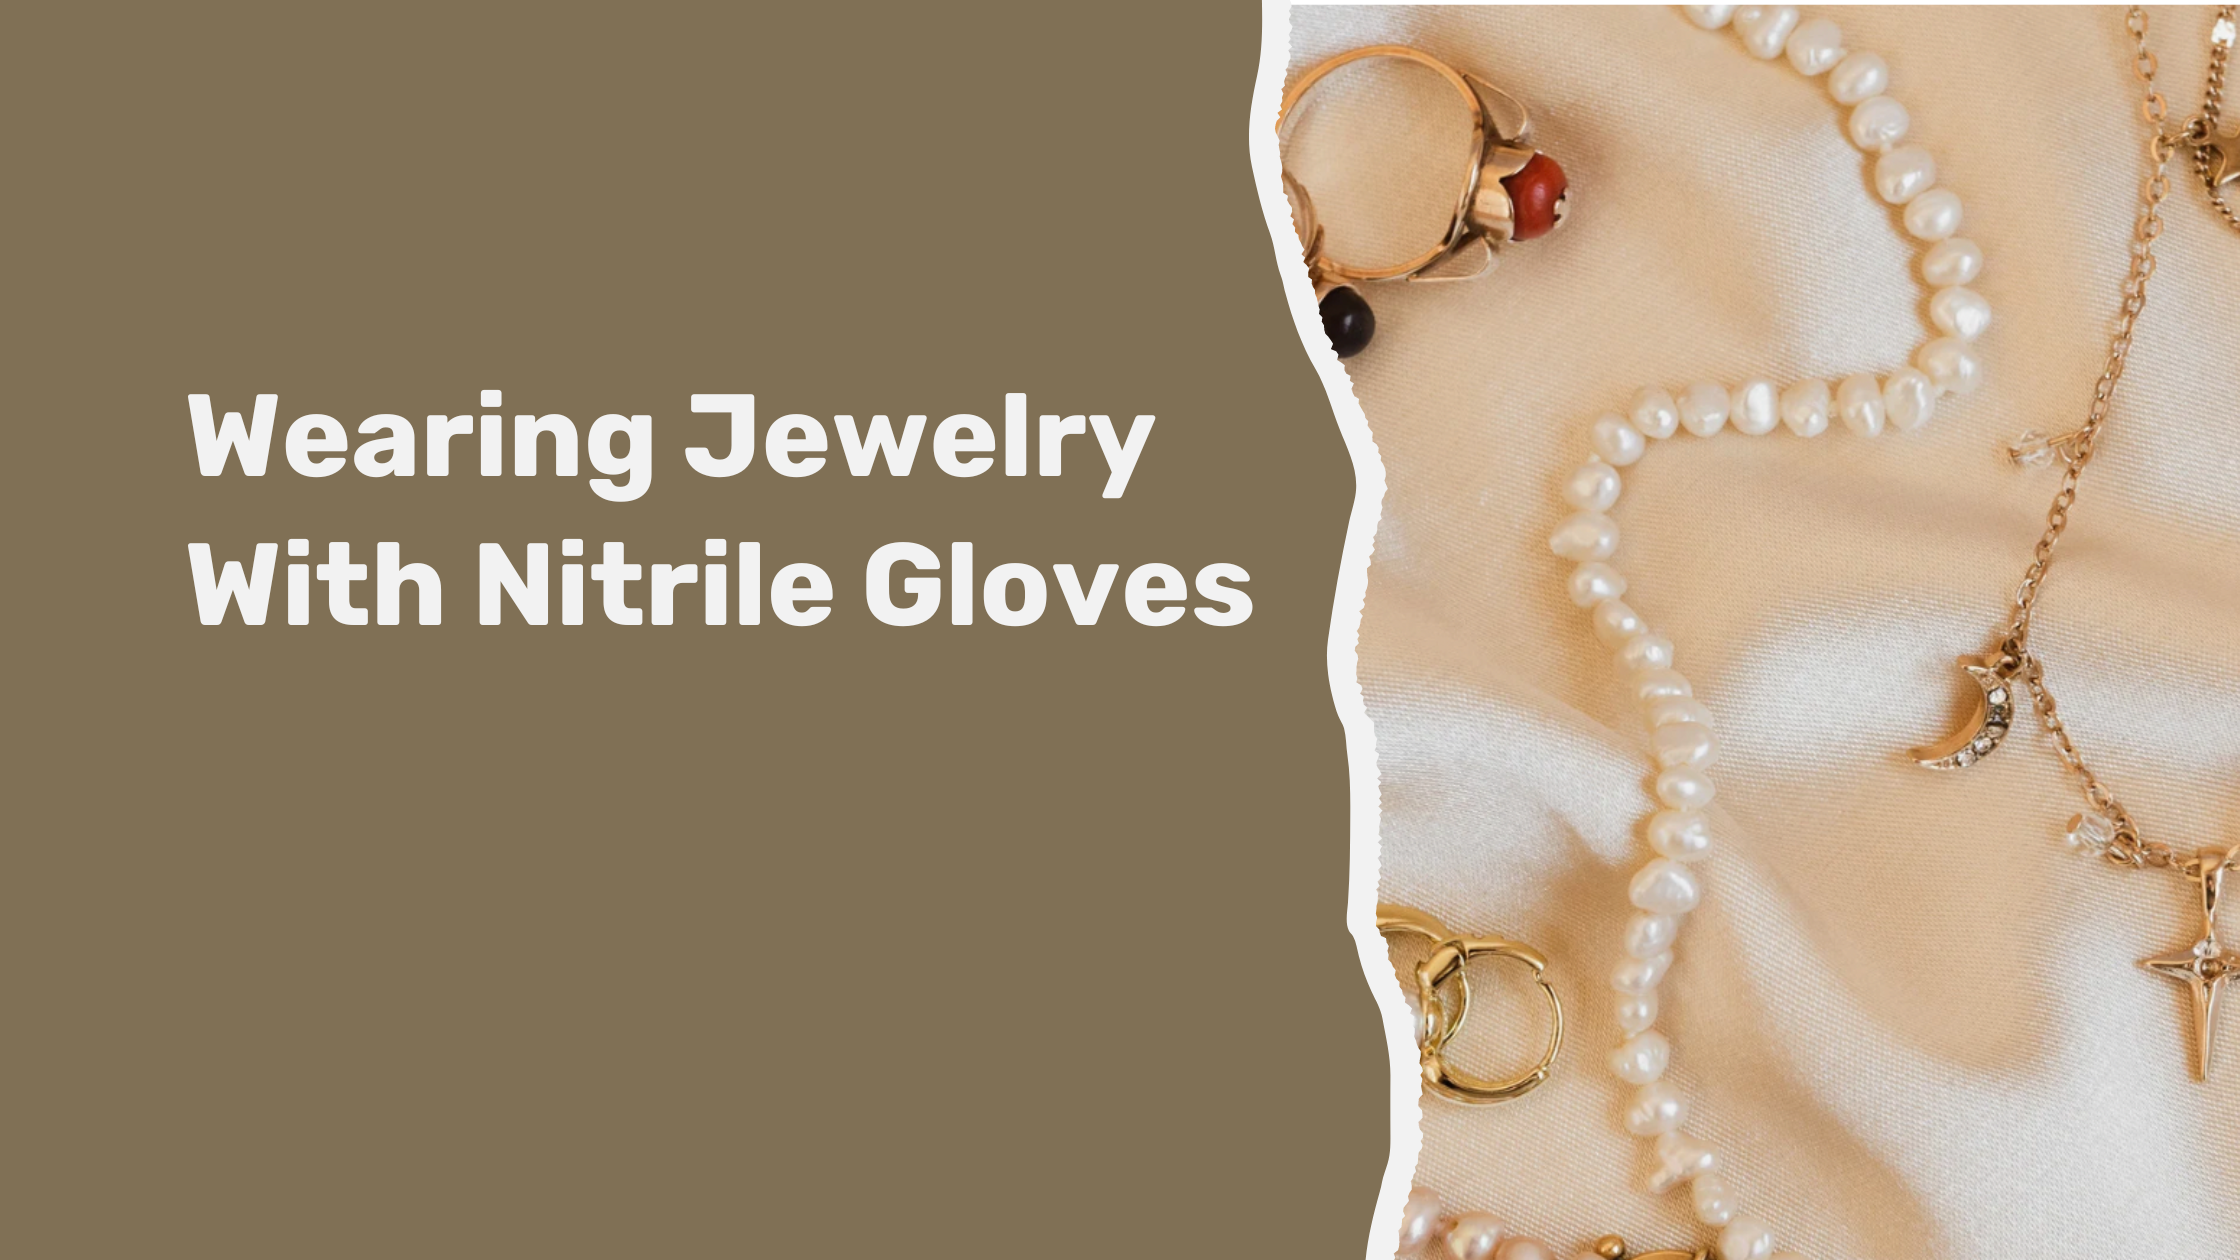 Can I Wear Jewelry With Nitrile Gloves